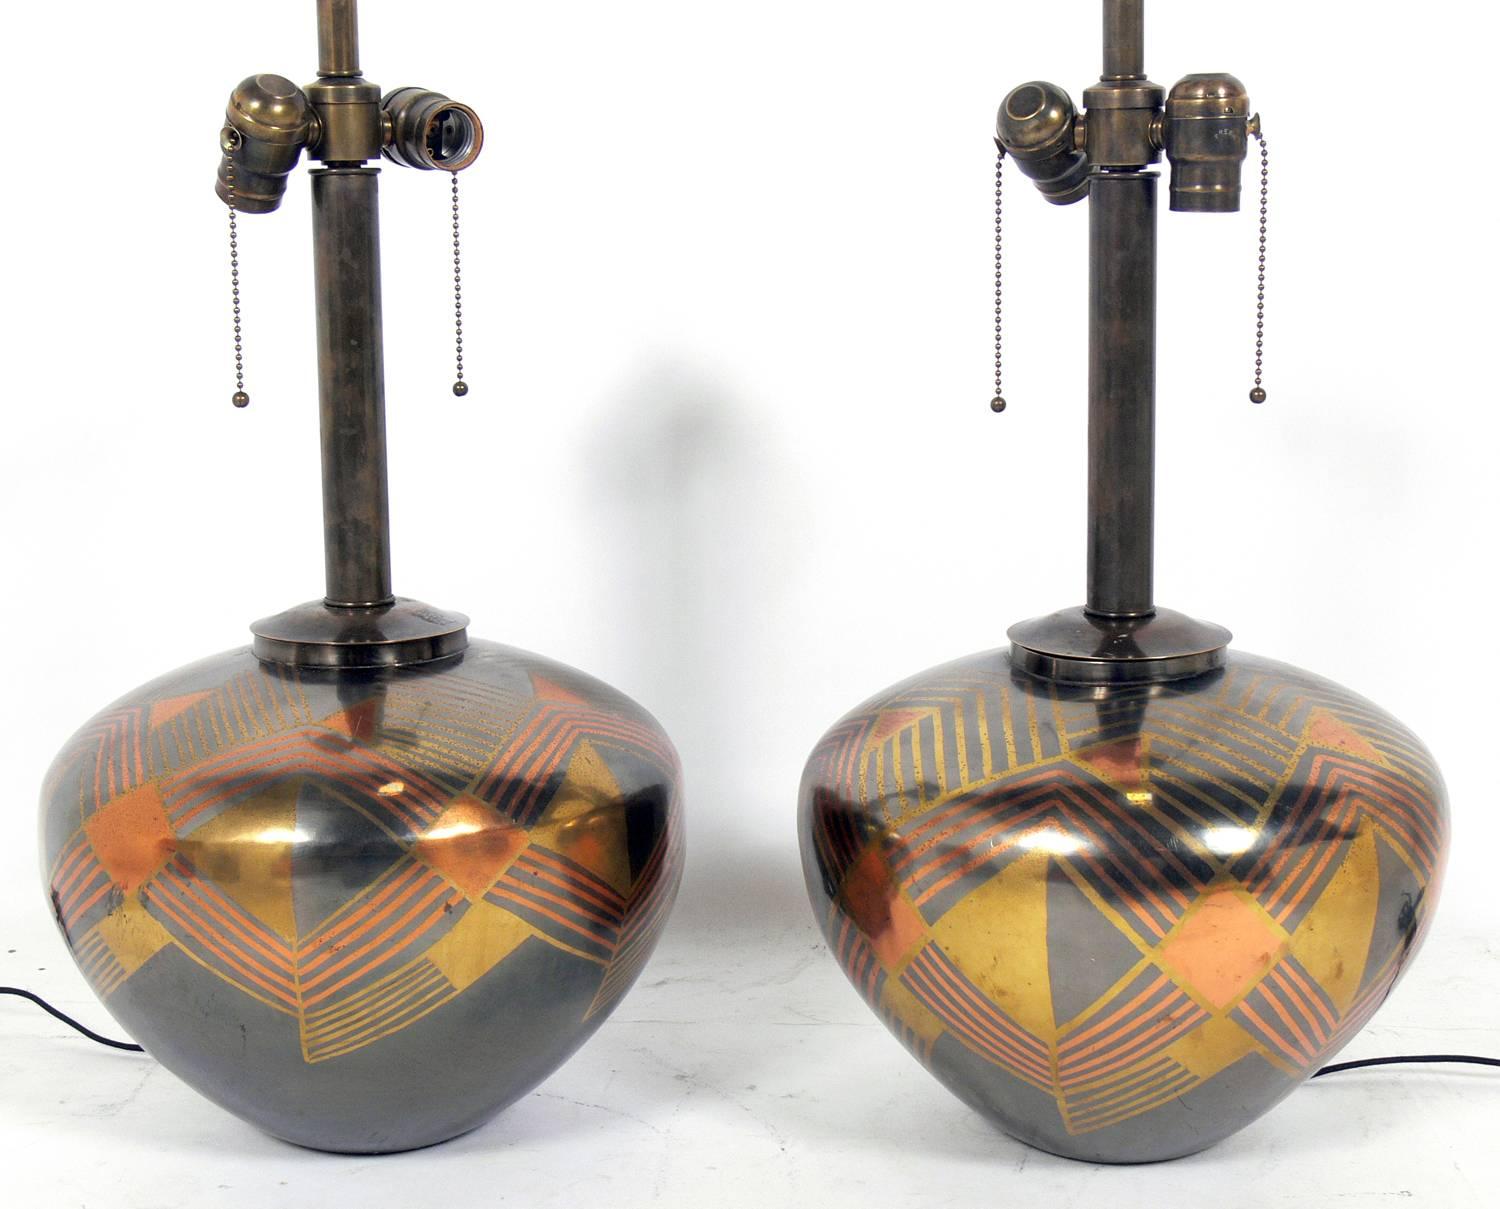 Mixed metal lamps in the manner of Karl Springer, circa 1970s. They retain their warm original patina.